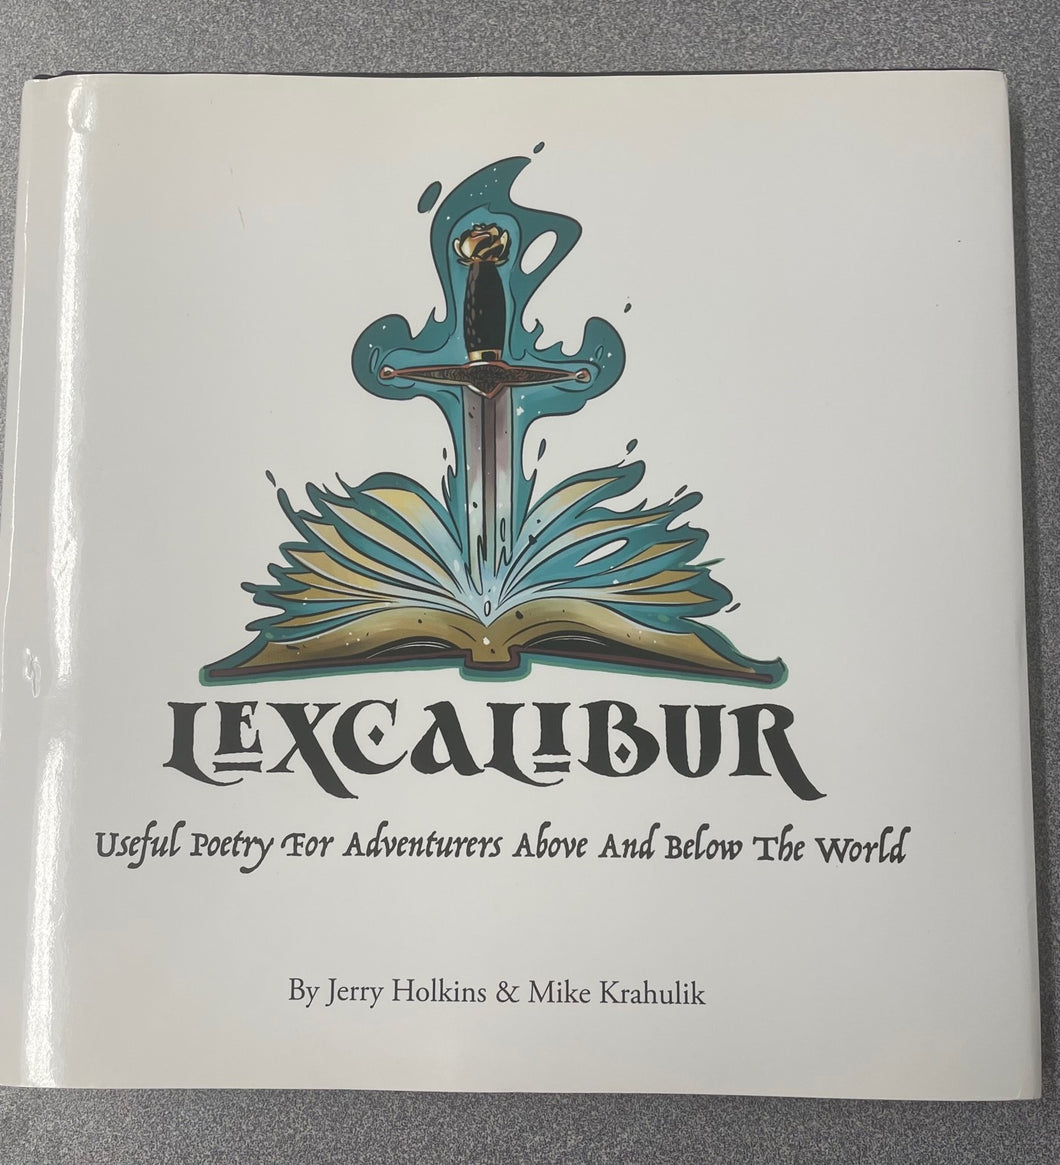 Lexcalibur: Useful Poetry for Adventurers Above and Below the World, Holkins, Jerry [2017] CP 7/23